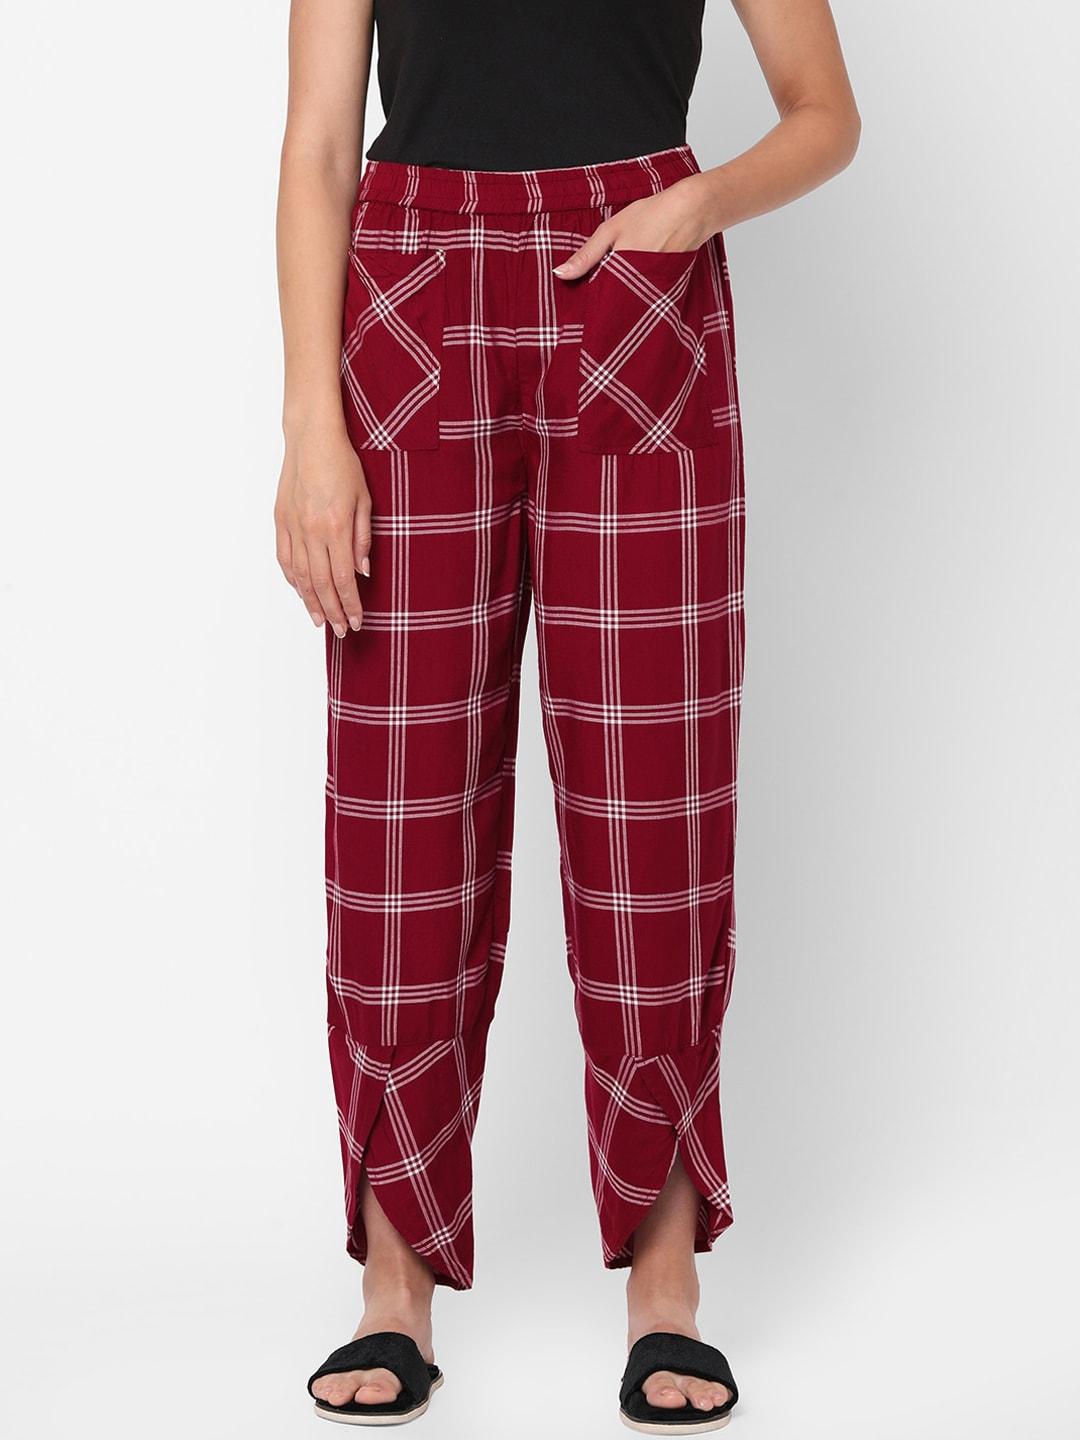 mystere-paris-women-red-checked-lounge-pants